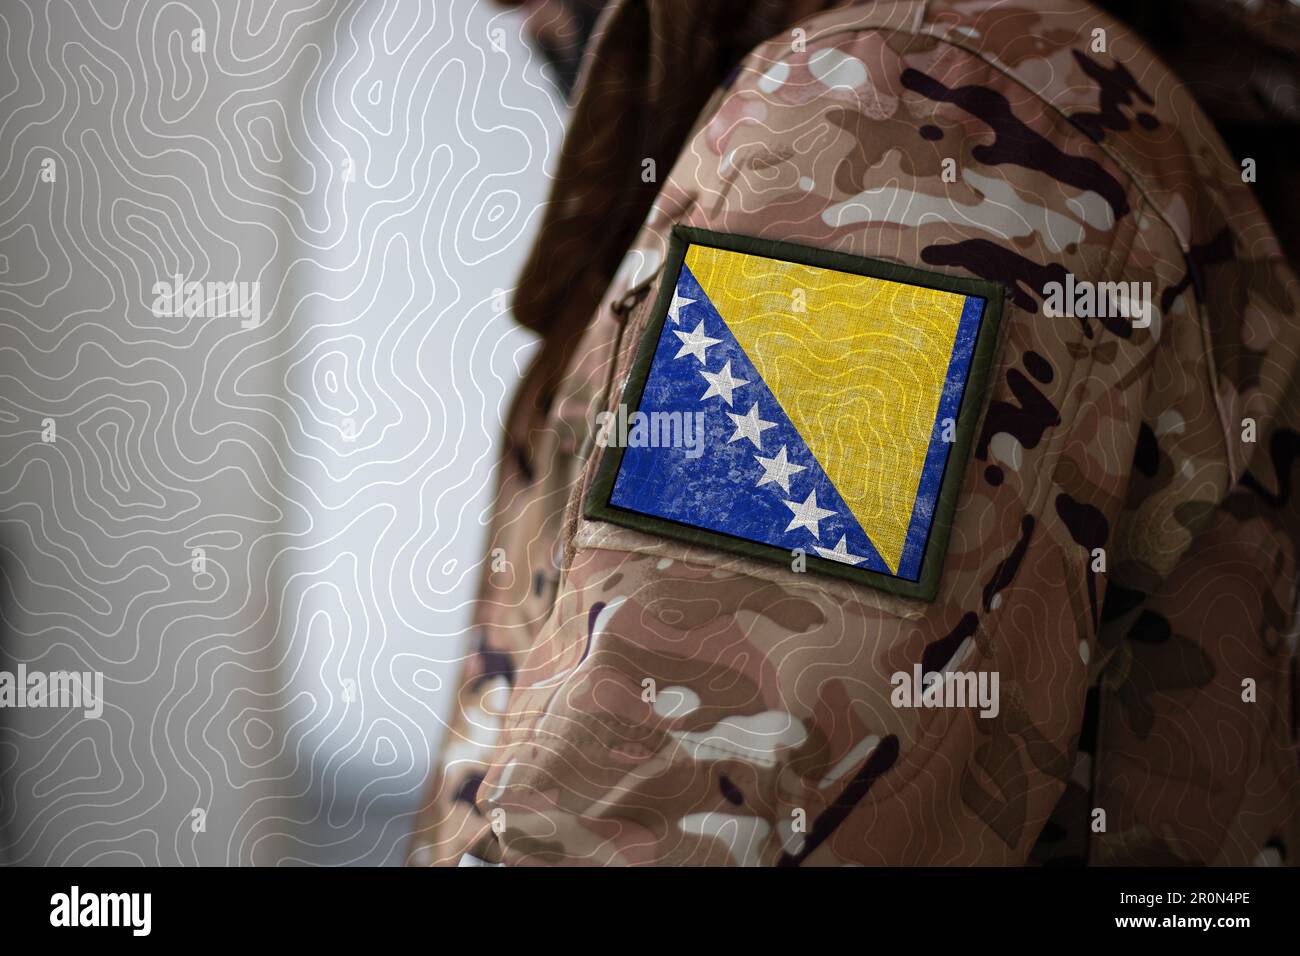 Bosnia and Herzegovina Soldier. Soldier with flag Bosnia and Herzegovina, Bosnia and Herzegovina flag on a military uniform. Camouflage clothing Stock Photo